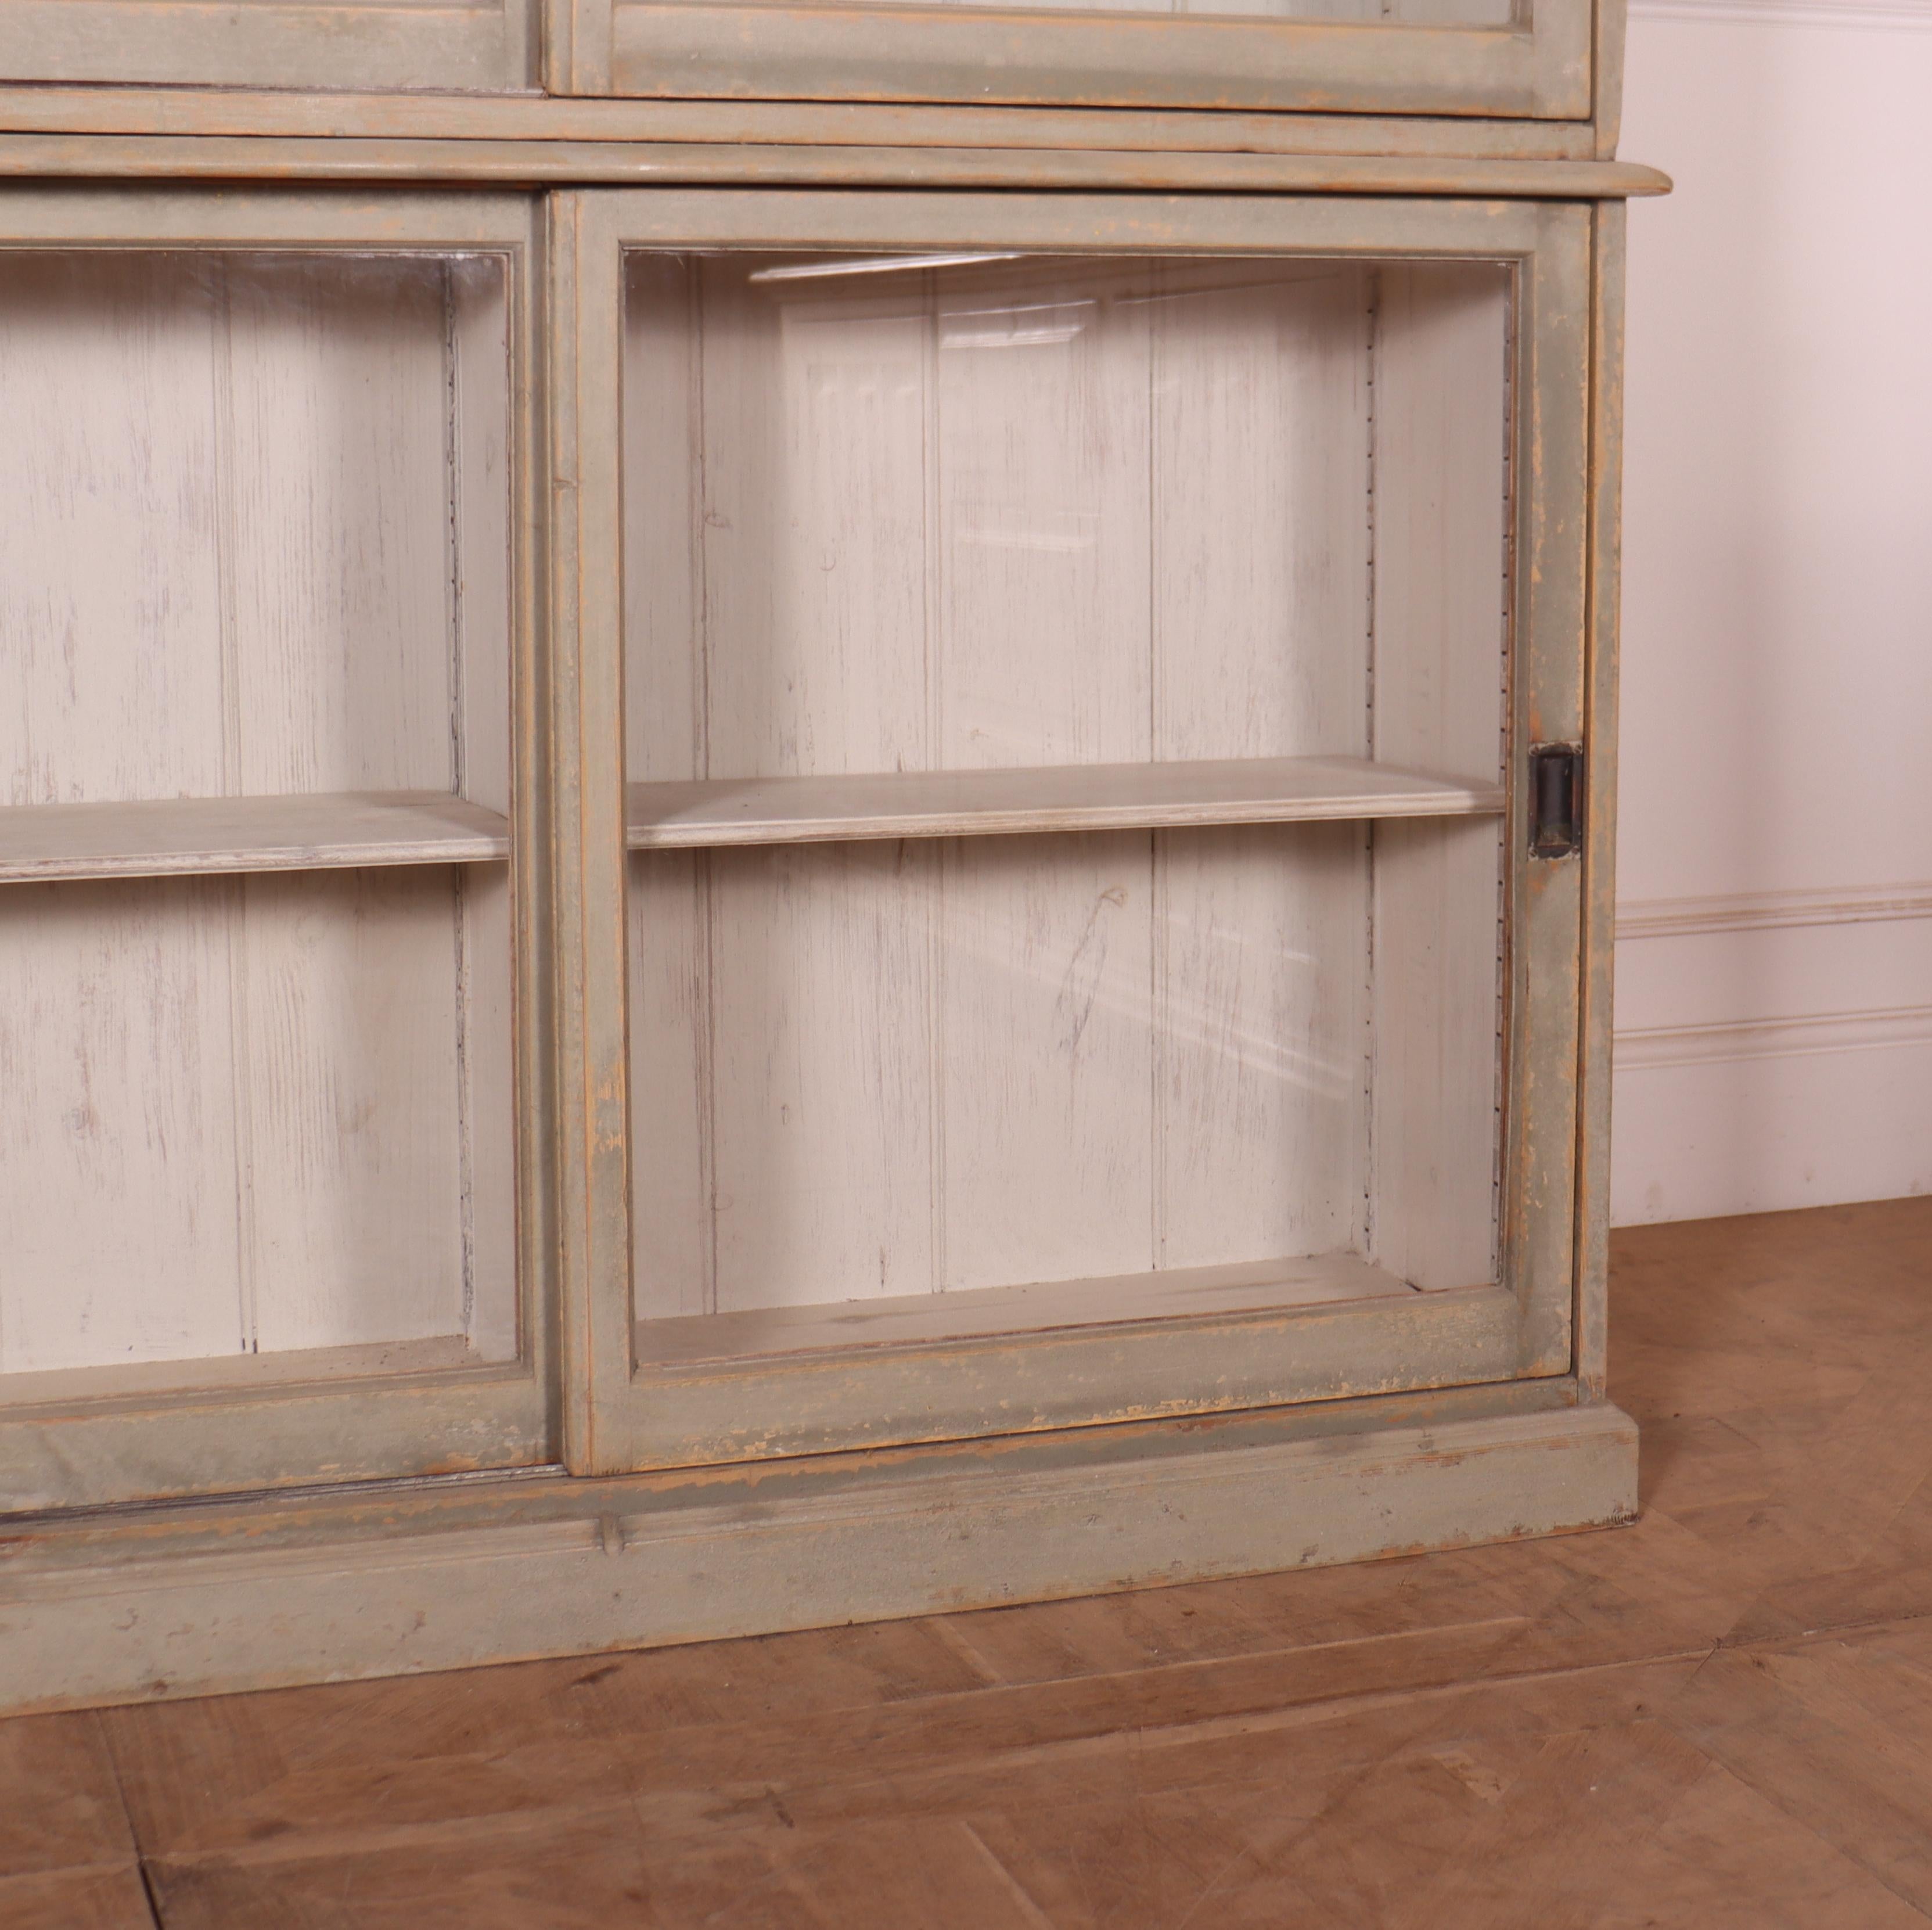 English Painted Glazed Bookcase In Good Condition For Sale In Leamington Spa, Warwickshire